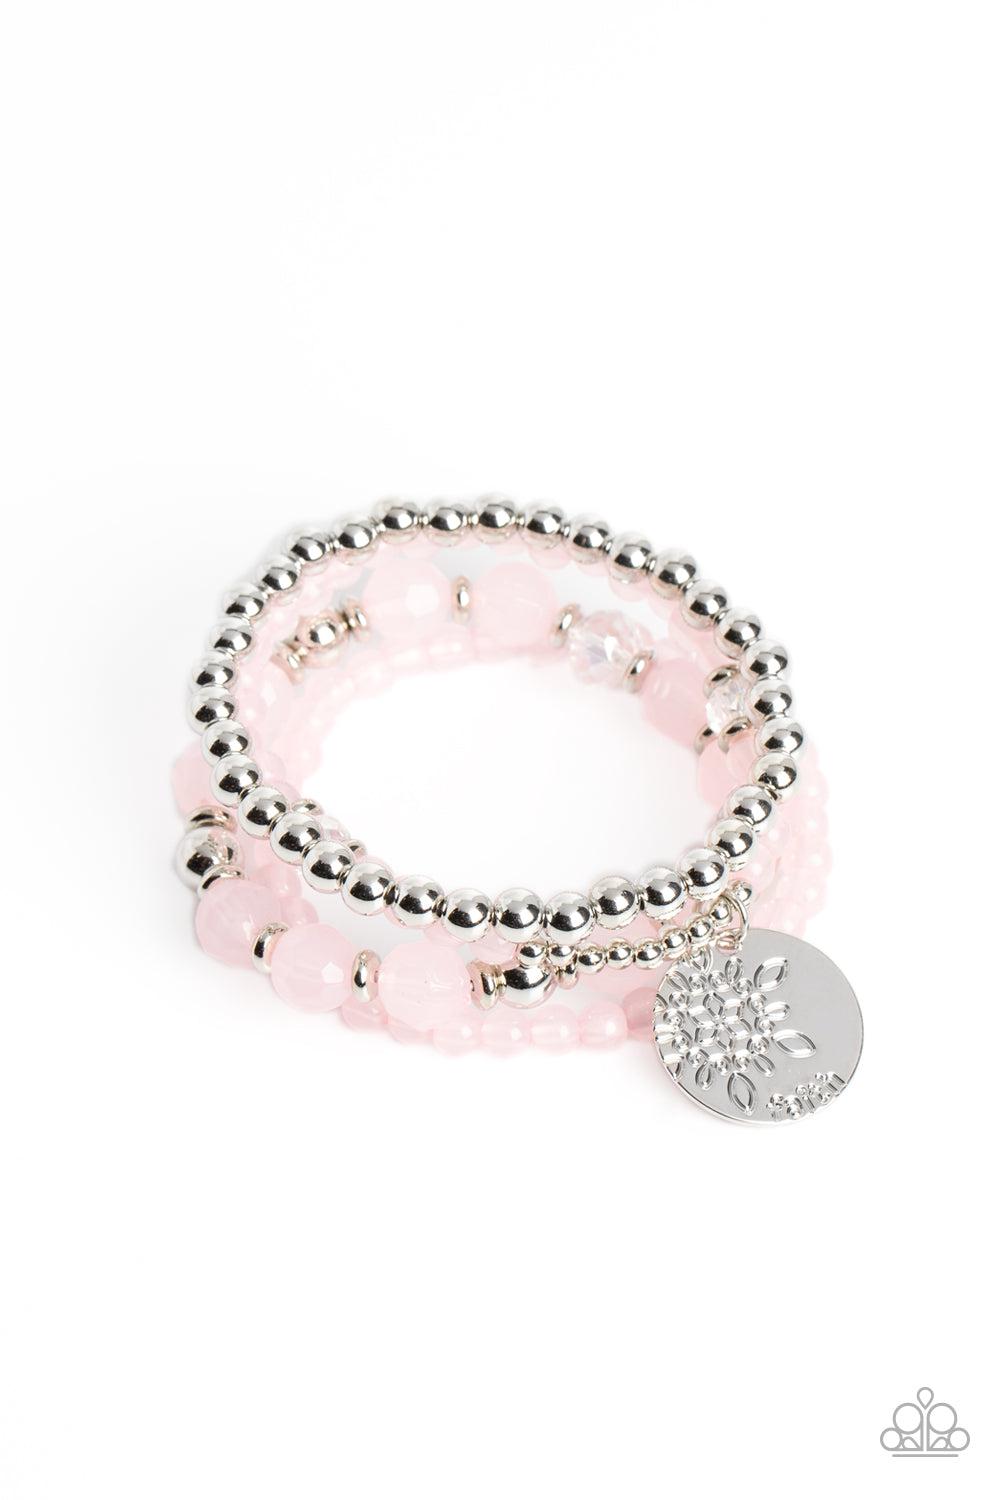 Surfer Style Pink Inspirational Bracelet - Paparazzi Accessories- lightbox - CarasShop.com - $5 Jewelry by Cara Jewels